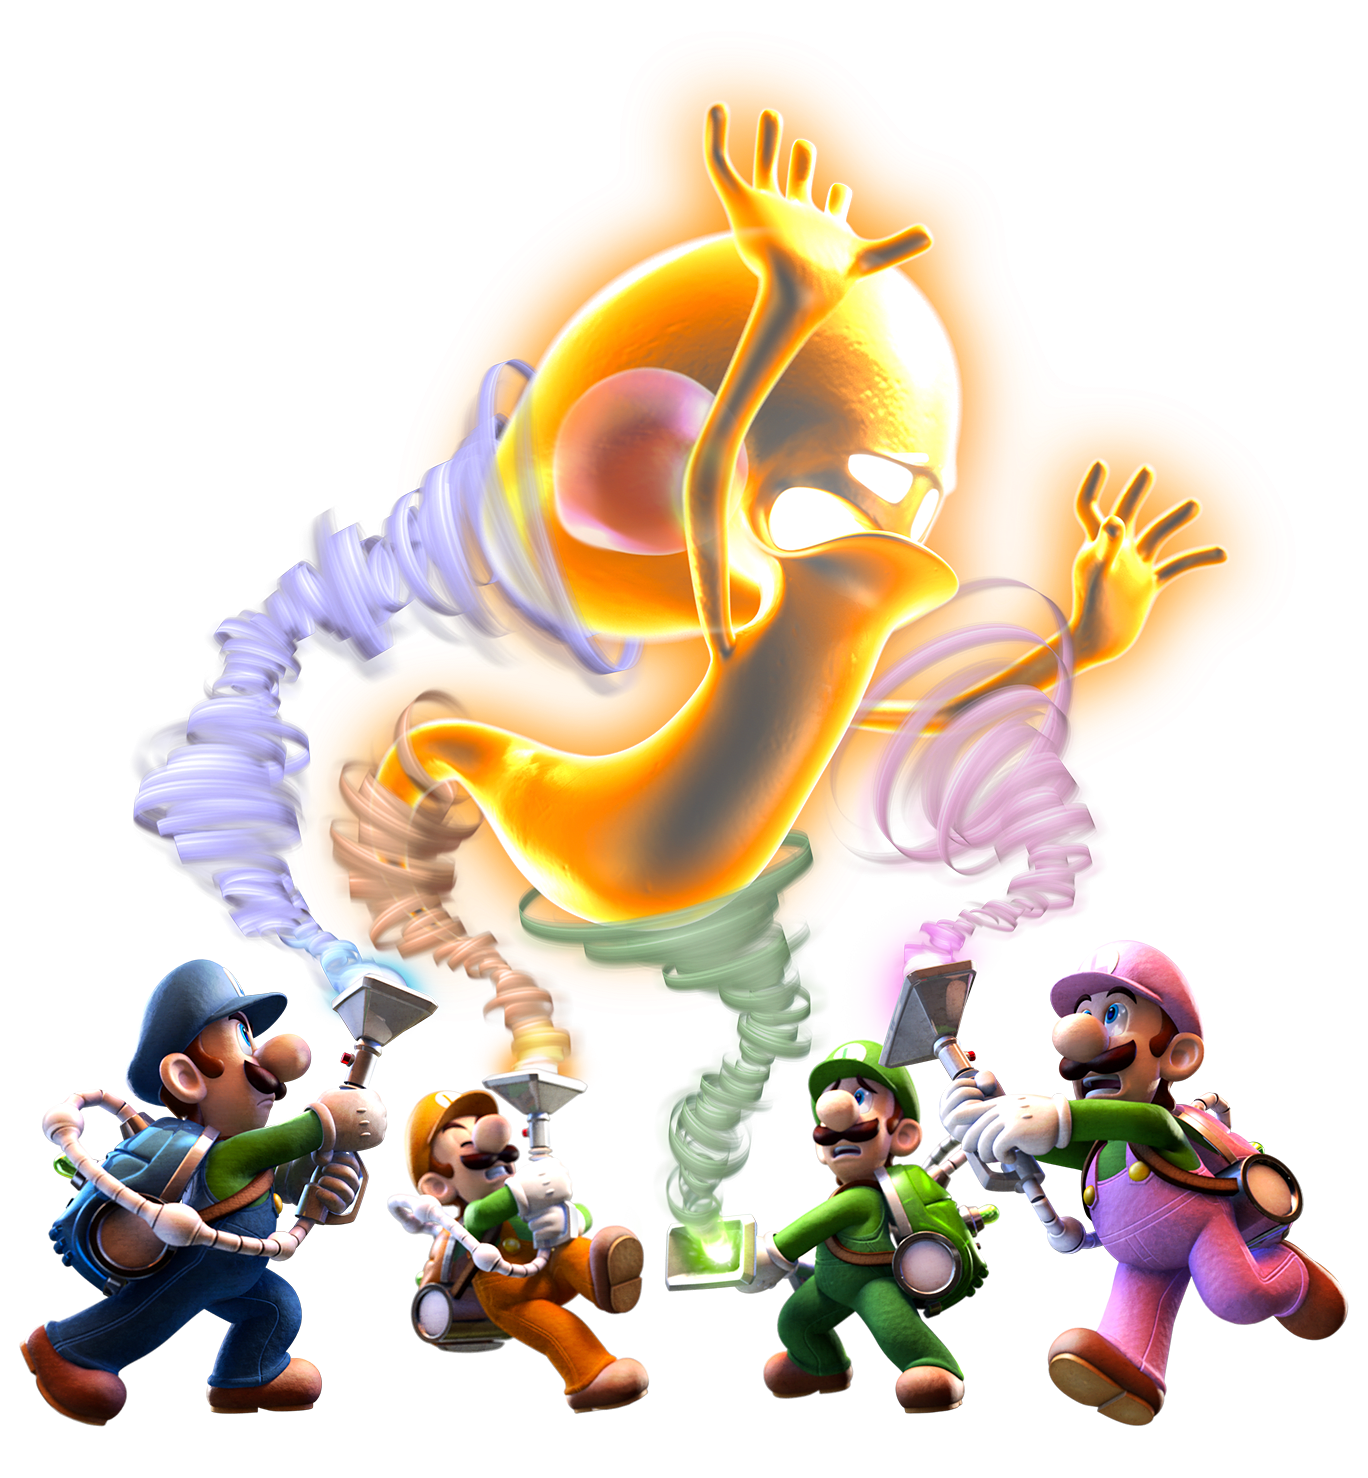 Four different Luigis fighting the ScareScraper together!